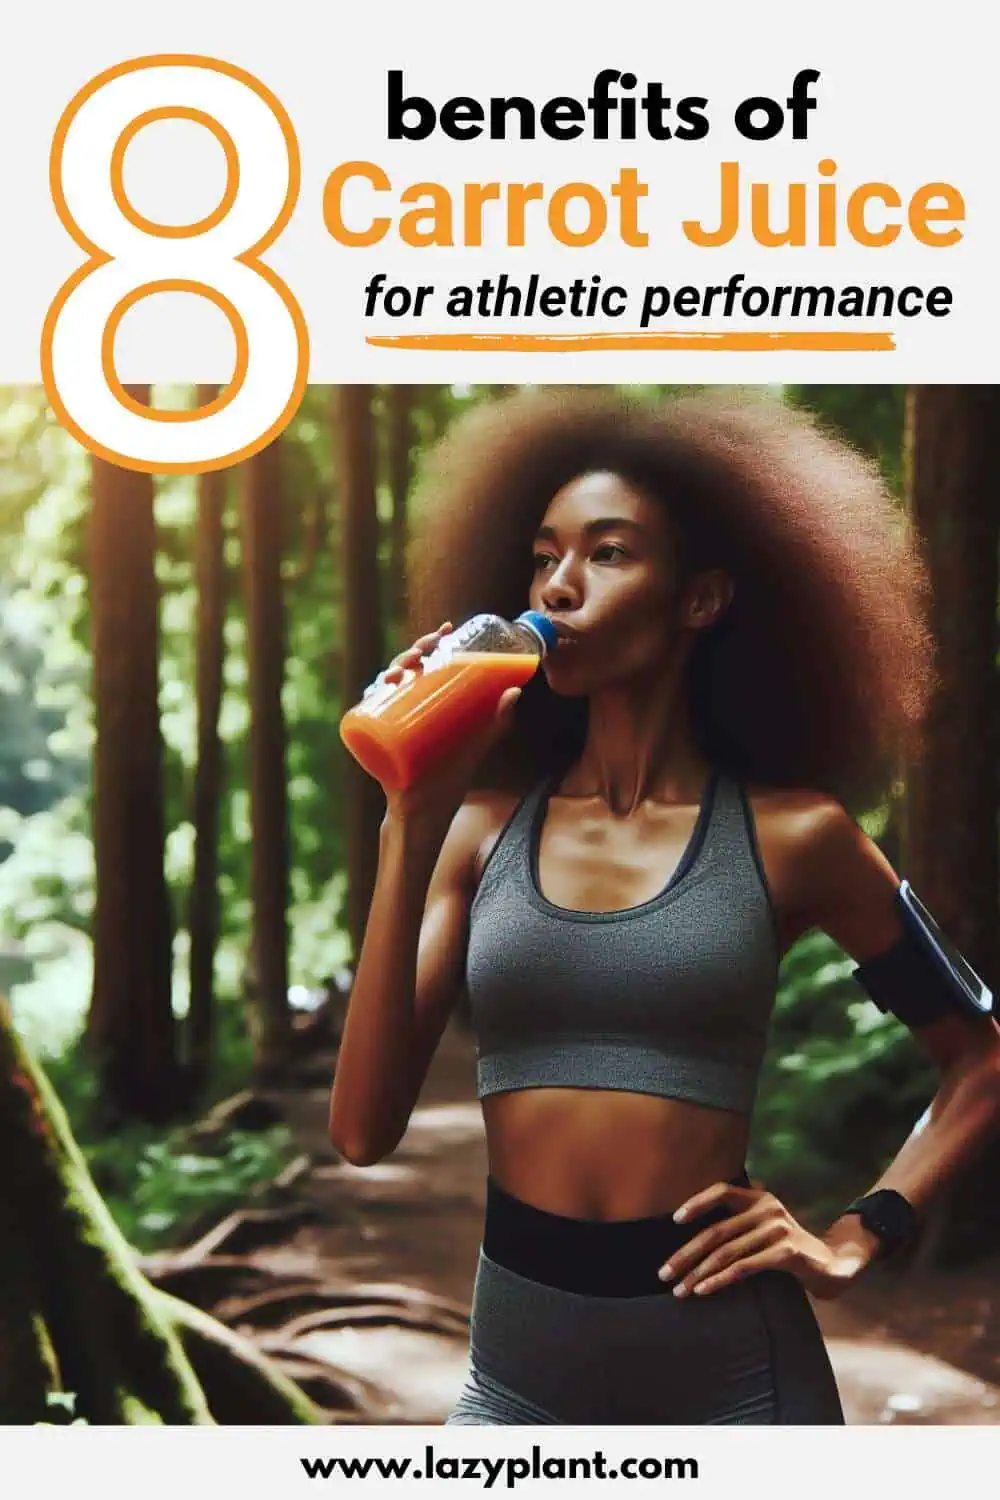 Benefits of Carrots & Carrot Juice for Athletes